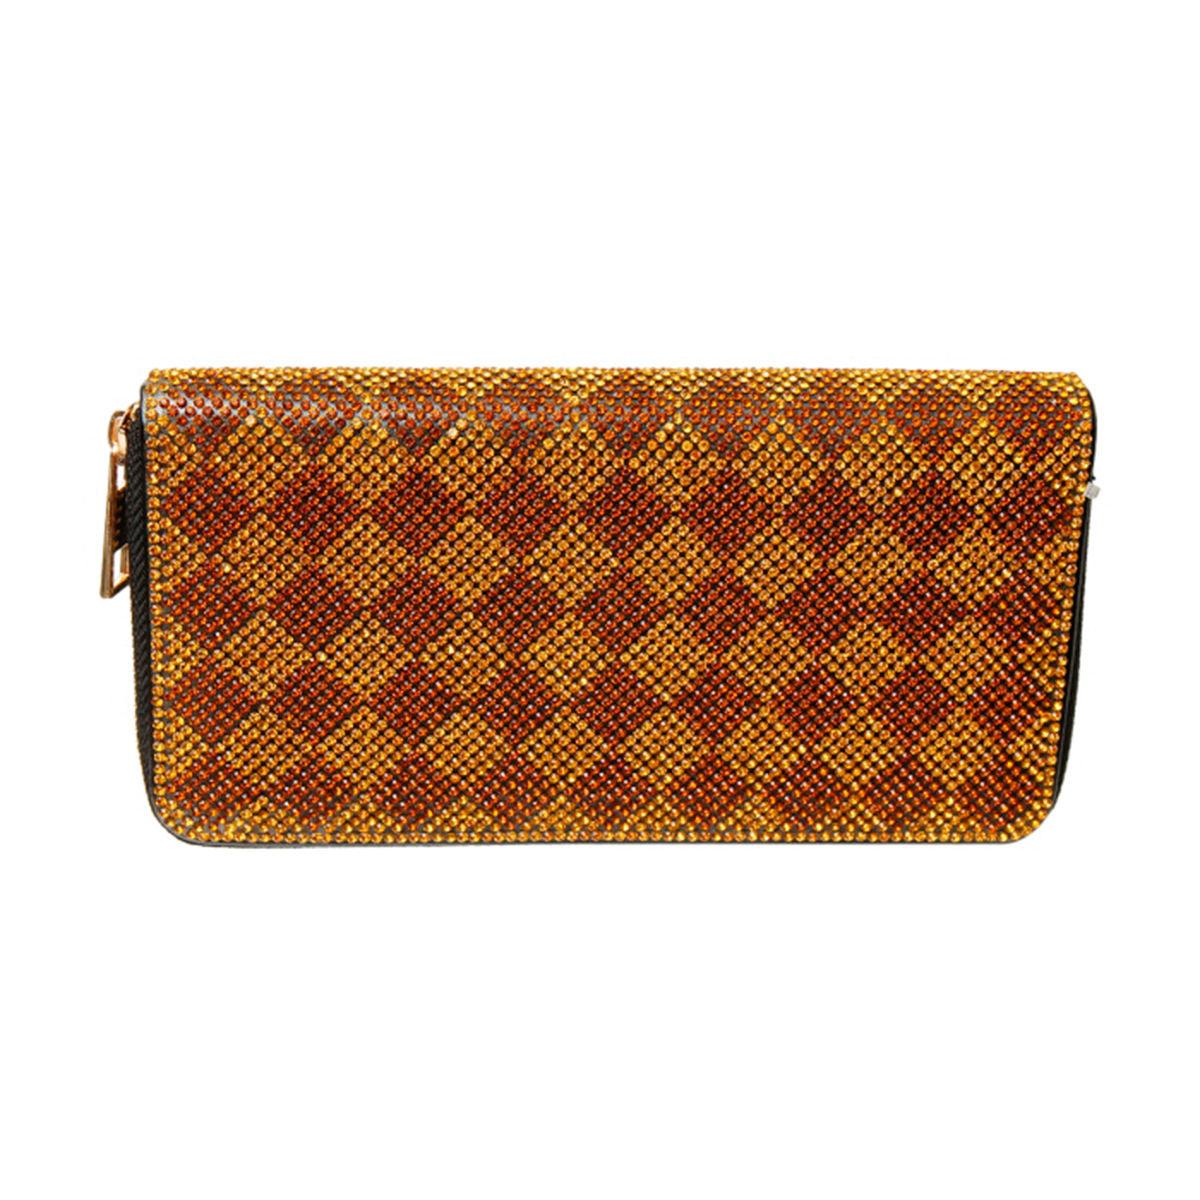 Stay Organized and Fashionable with a Diamond Pattern Zipper Wallet